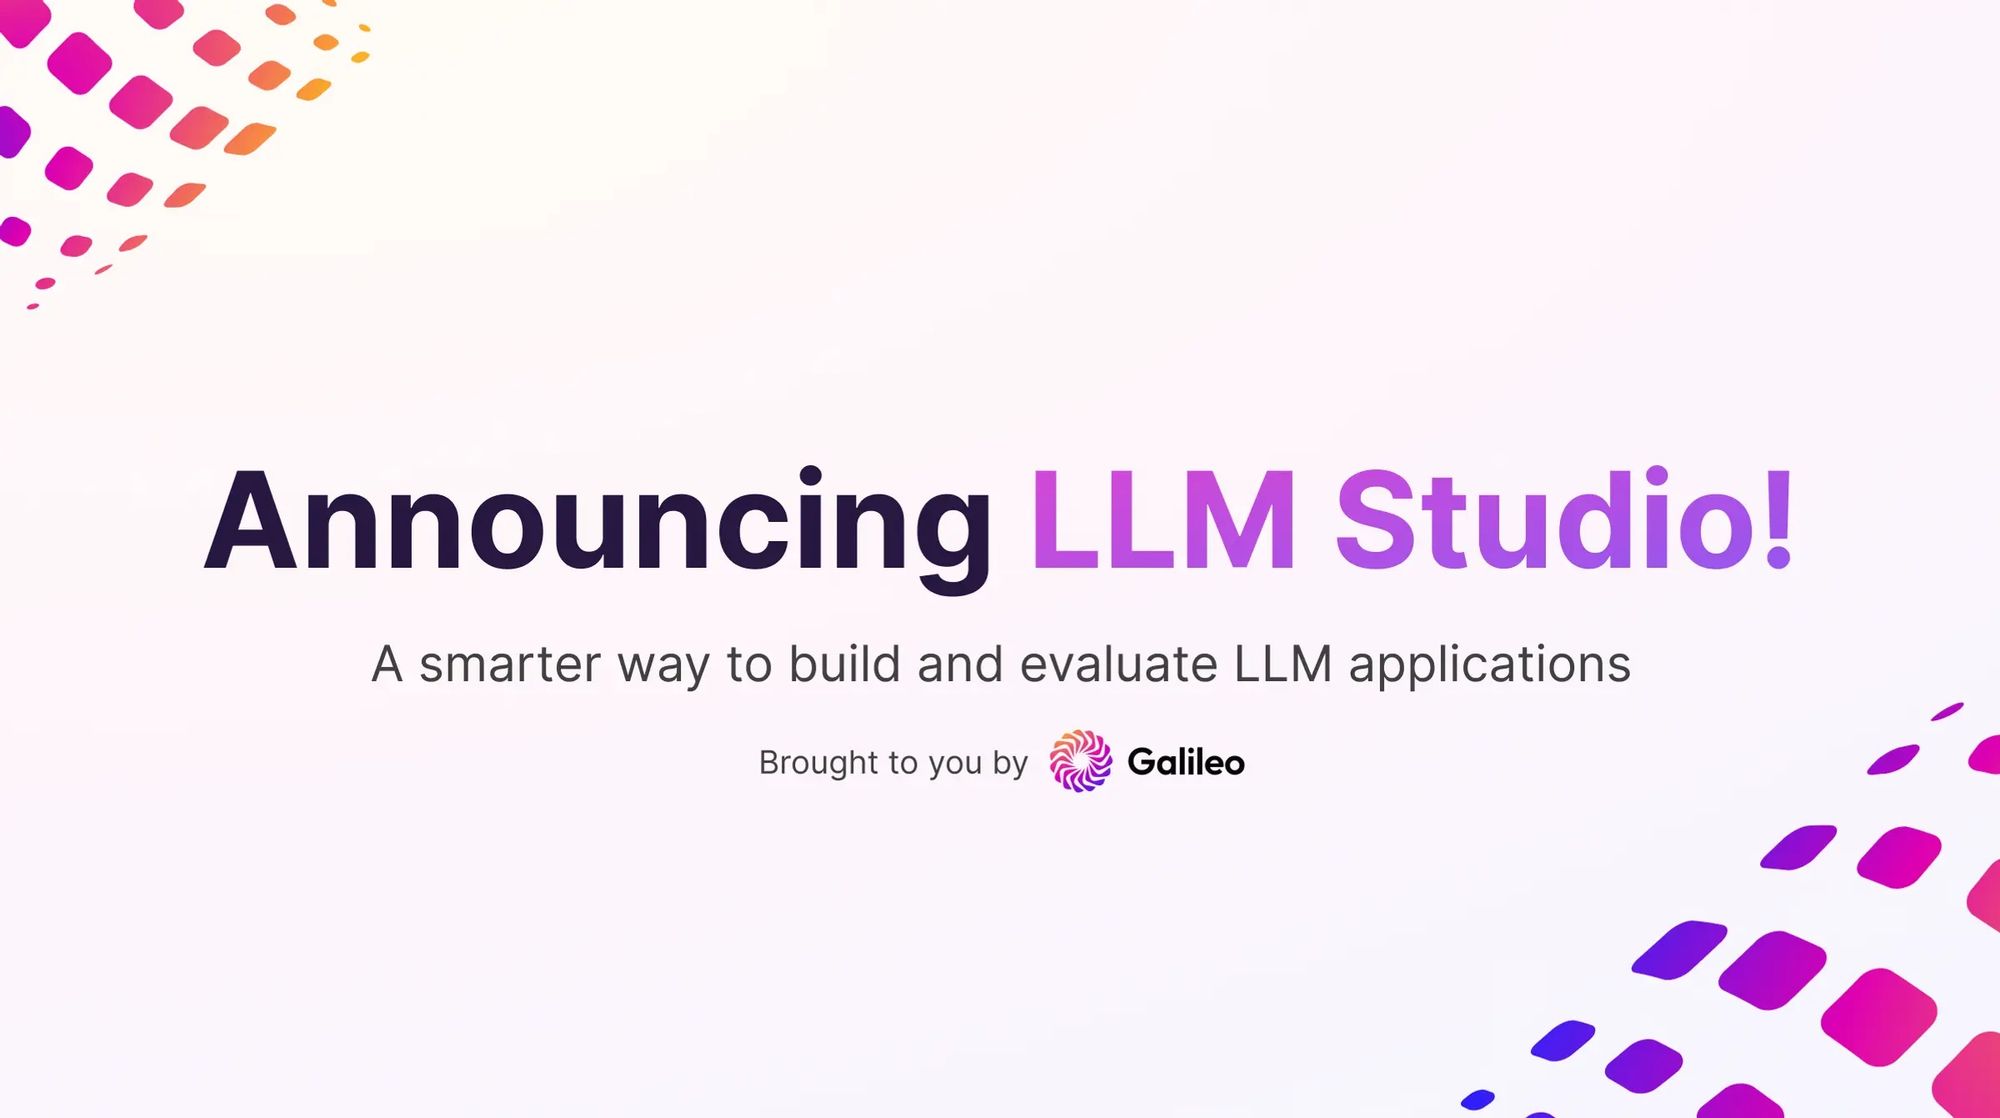 Studio LLM is Galileo’s smarter solution for building and evaluating LLM apps